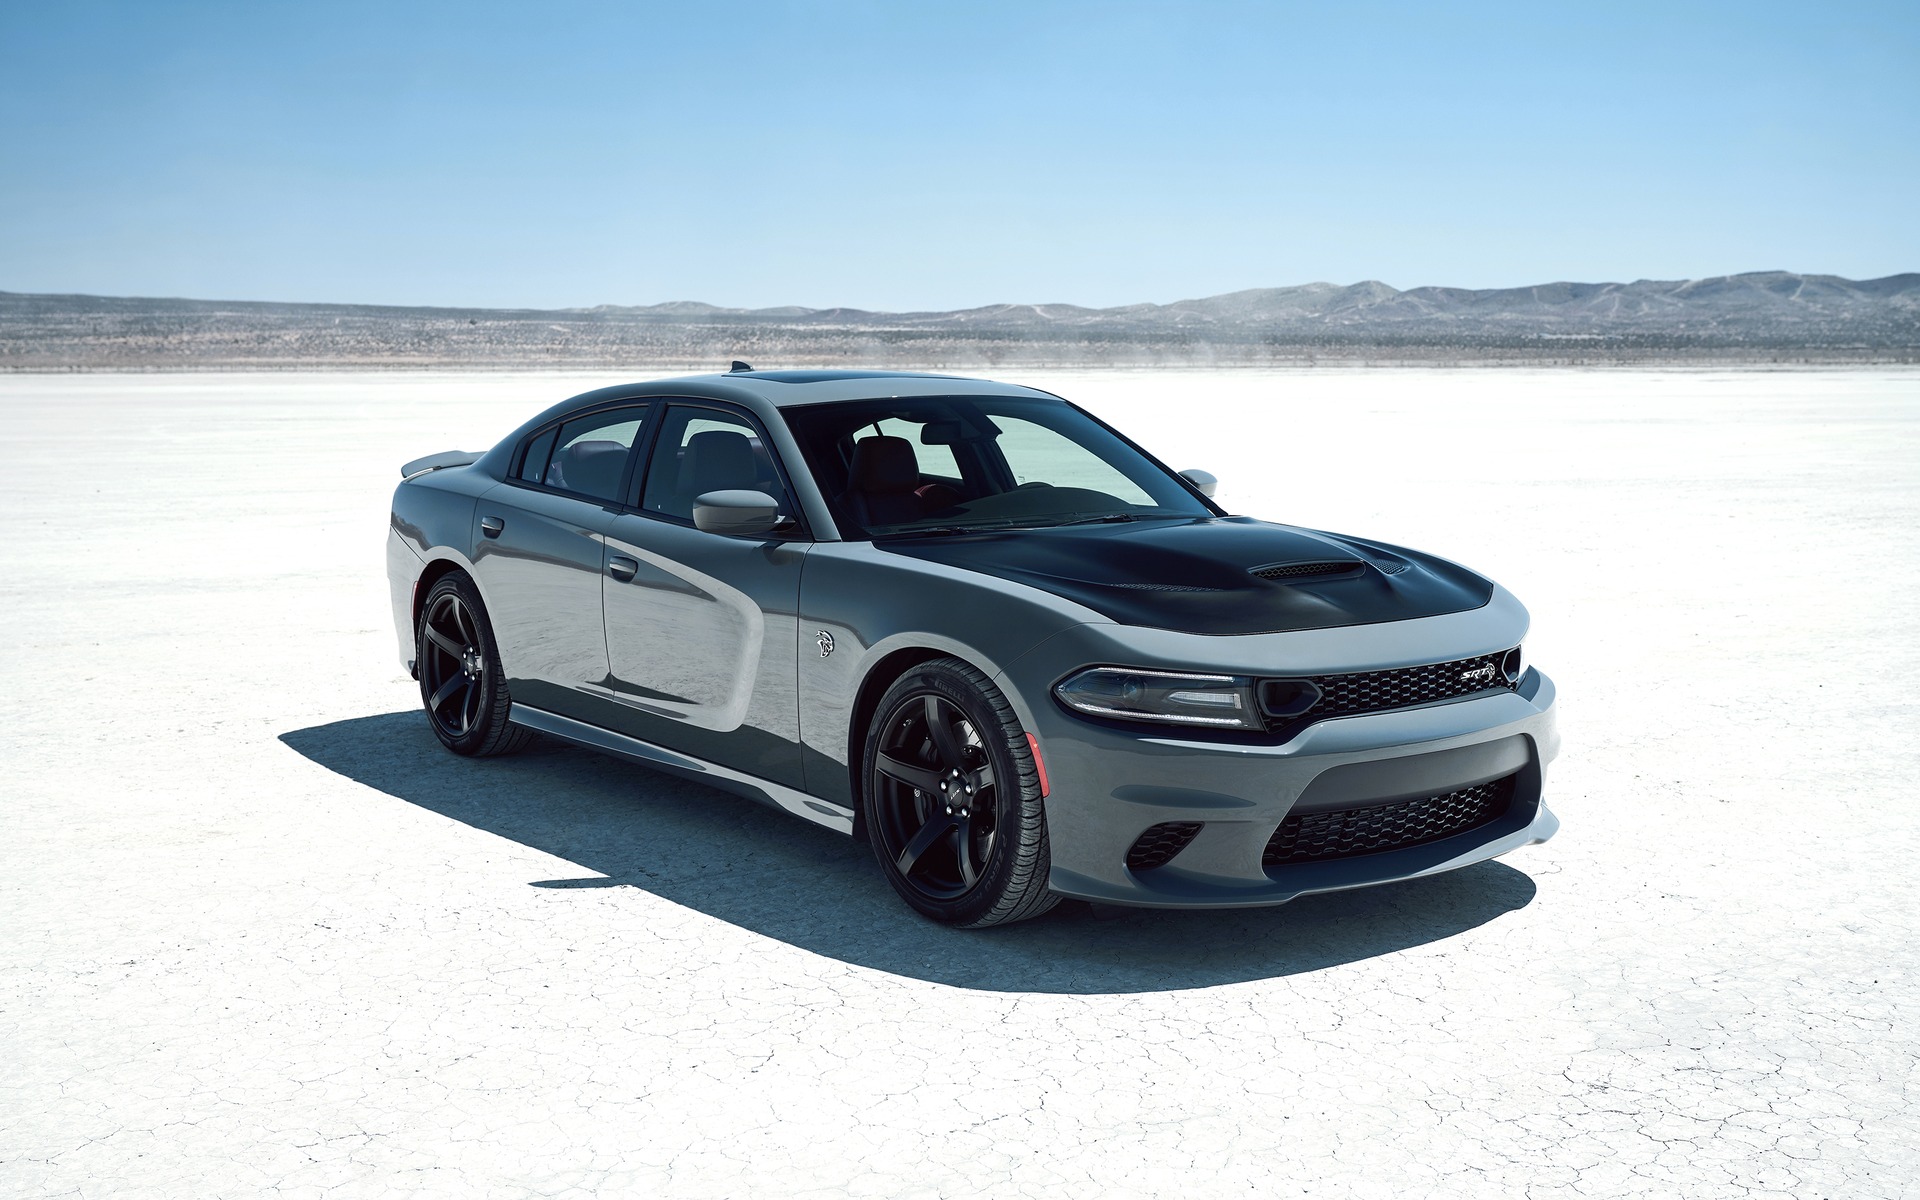 grube rim dybtgående 2019 Dodge Charger SRT Hellcat Specifications - The Car Guide